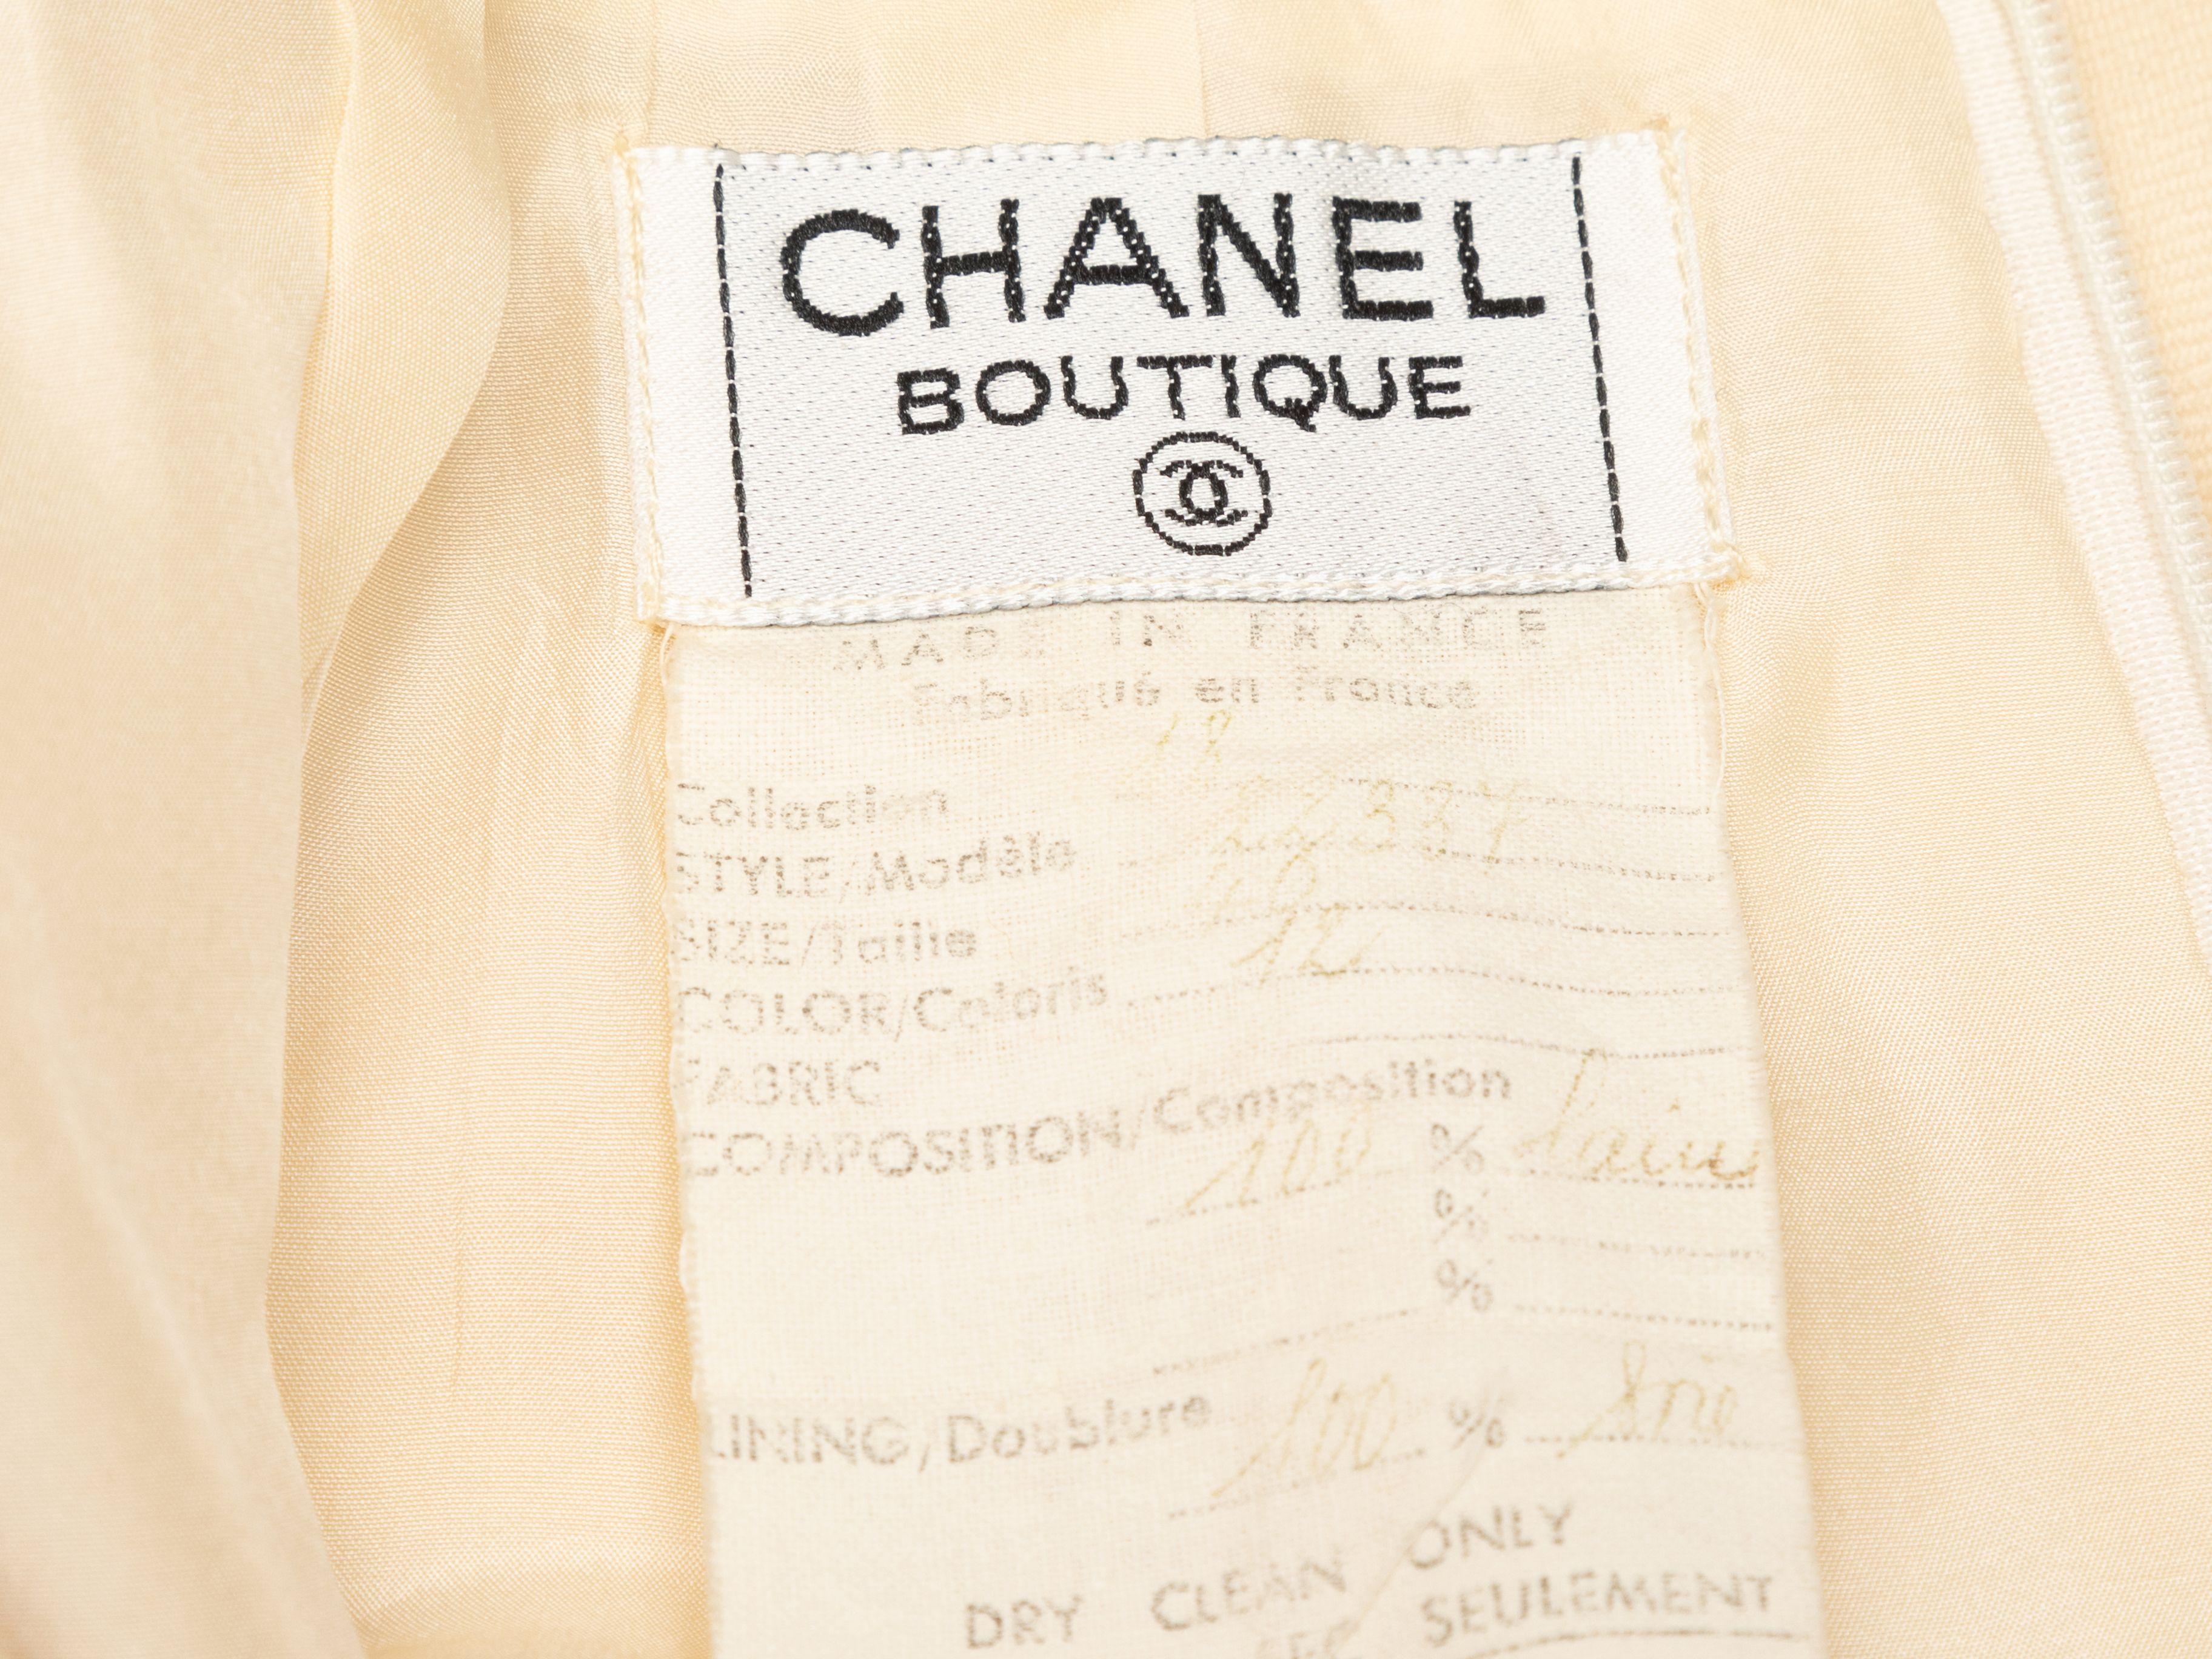 Product Details: Vintage cream wool knee-length skirt by Chanel Boutique. Pleating at waist. Zip closure at back. 30